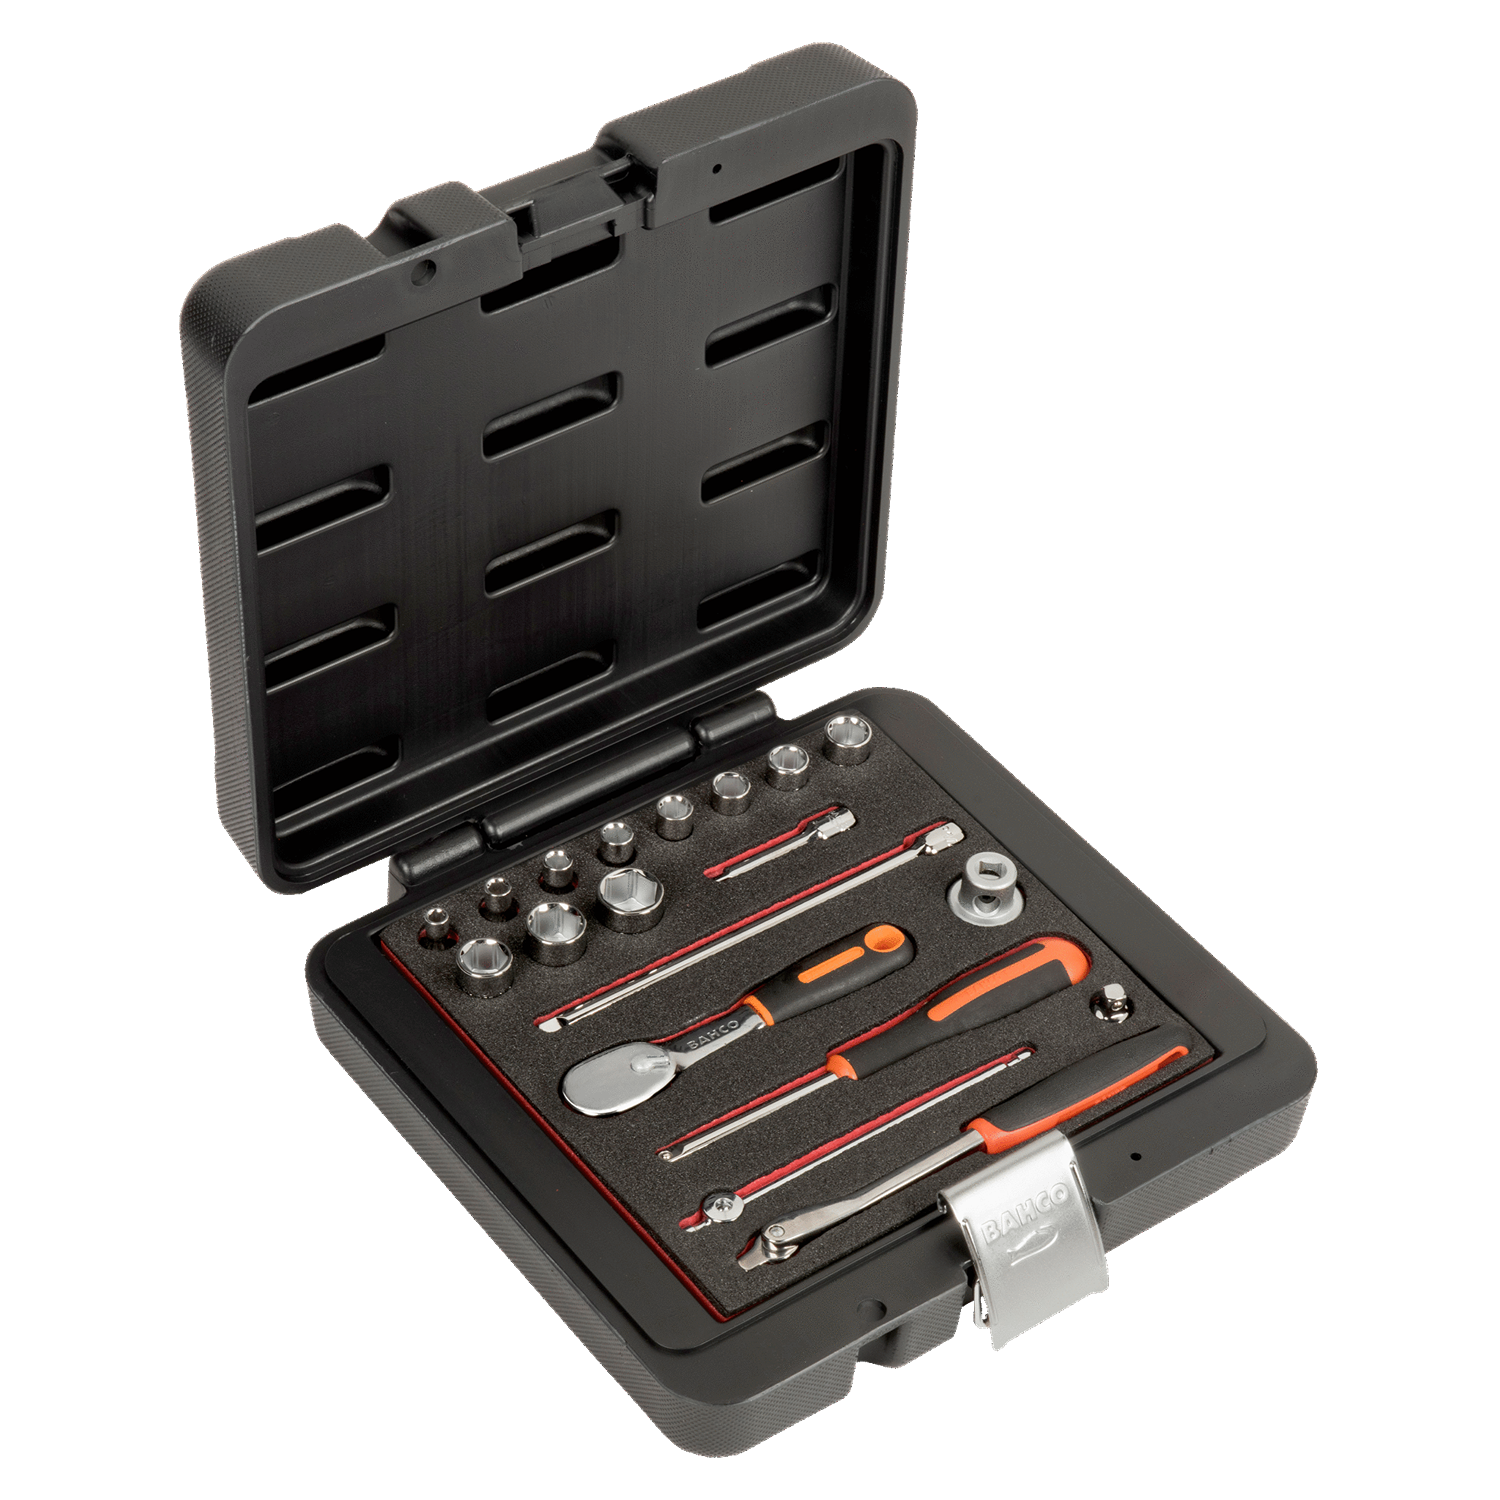 BAHCO 6821NZ 1/4” Square Drive Socket Set And Breaker Bars - Premium Socket Set from BAHCO - Shop now at Yew Aik.